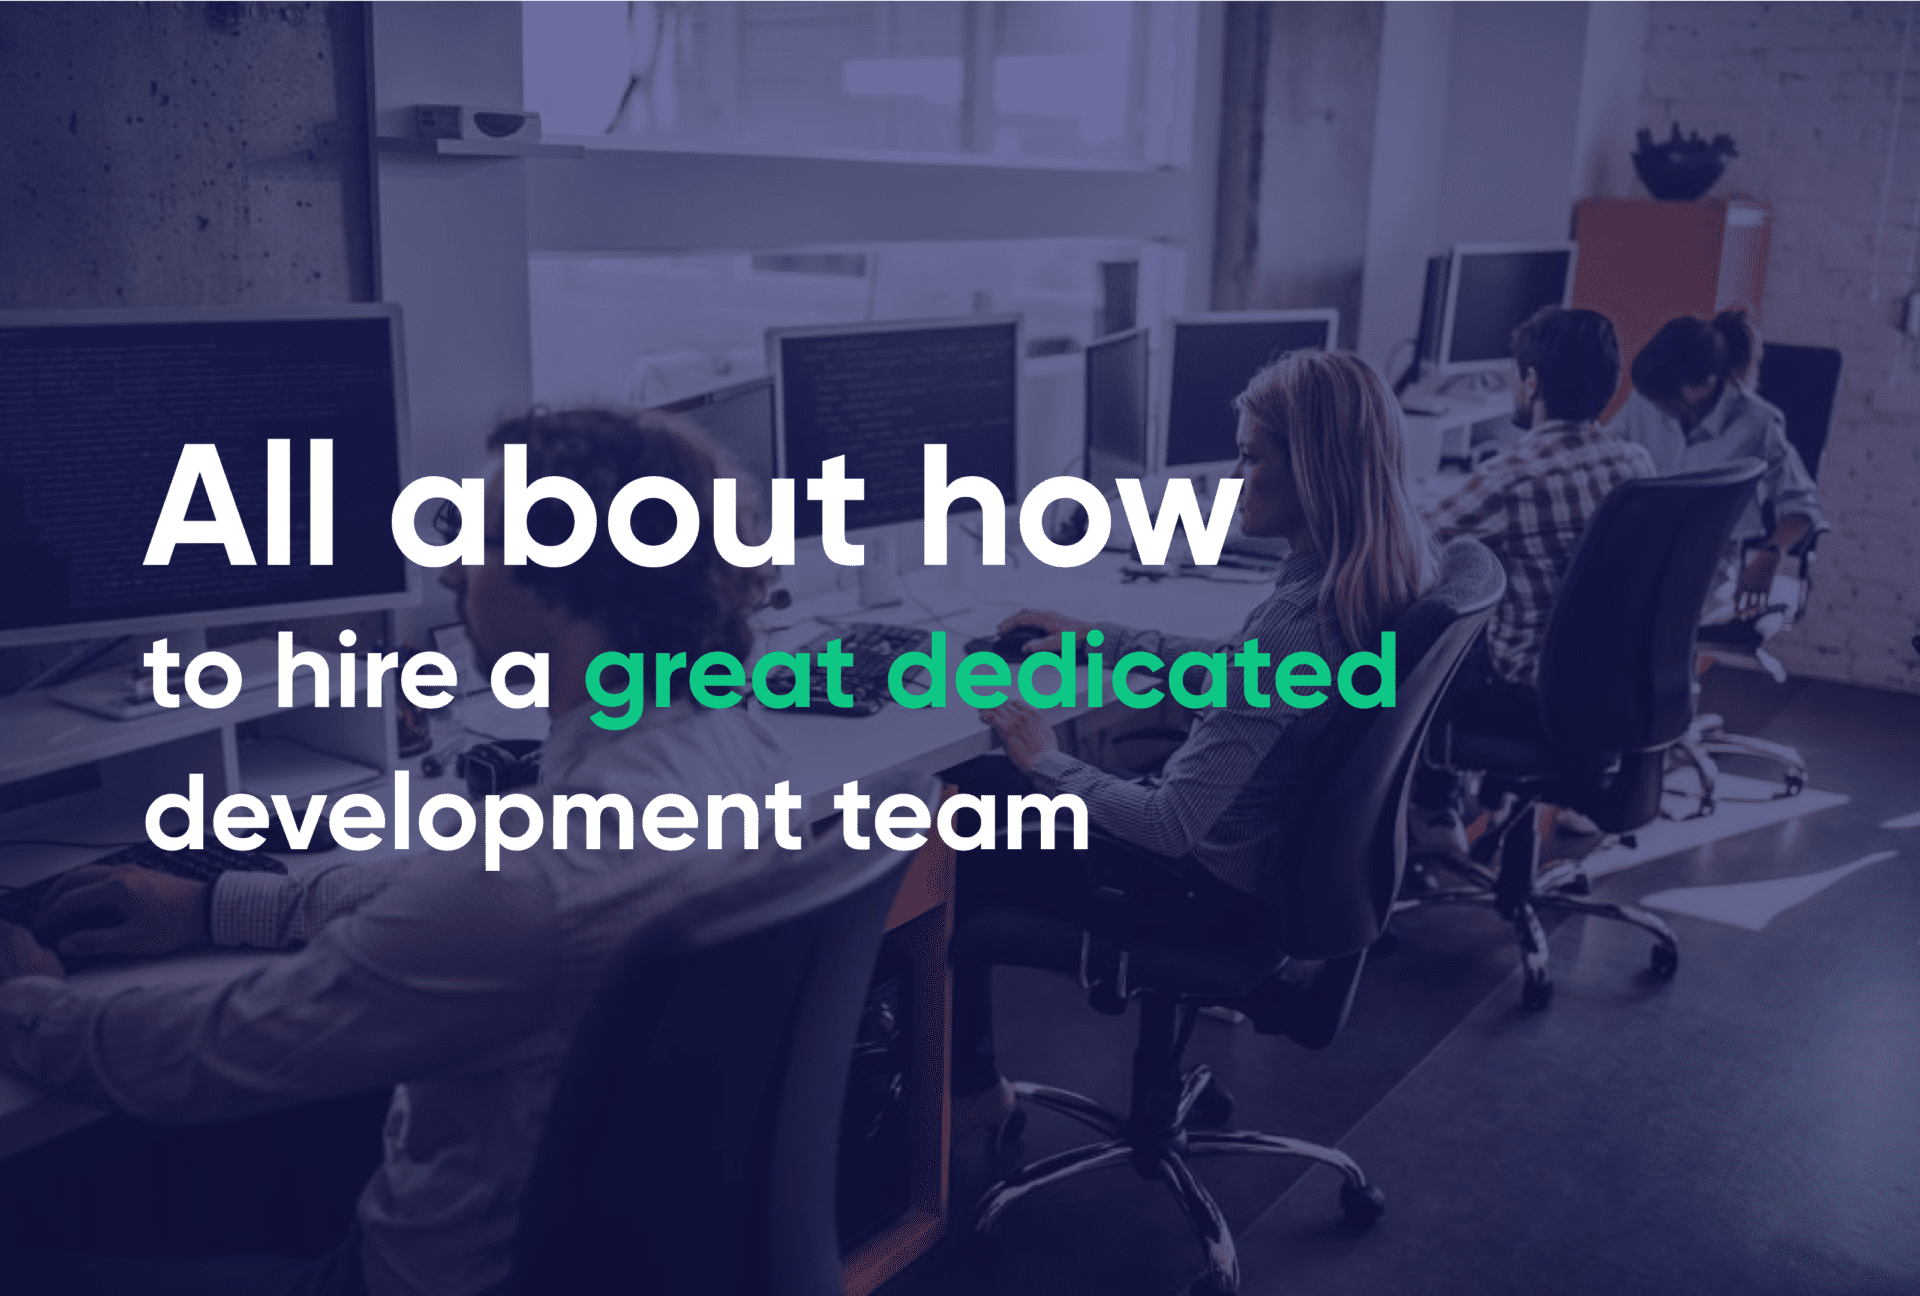 All about how to hire development team